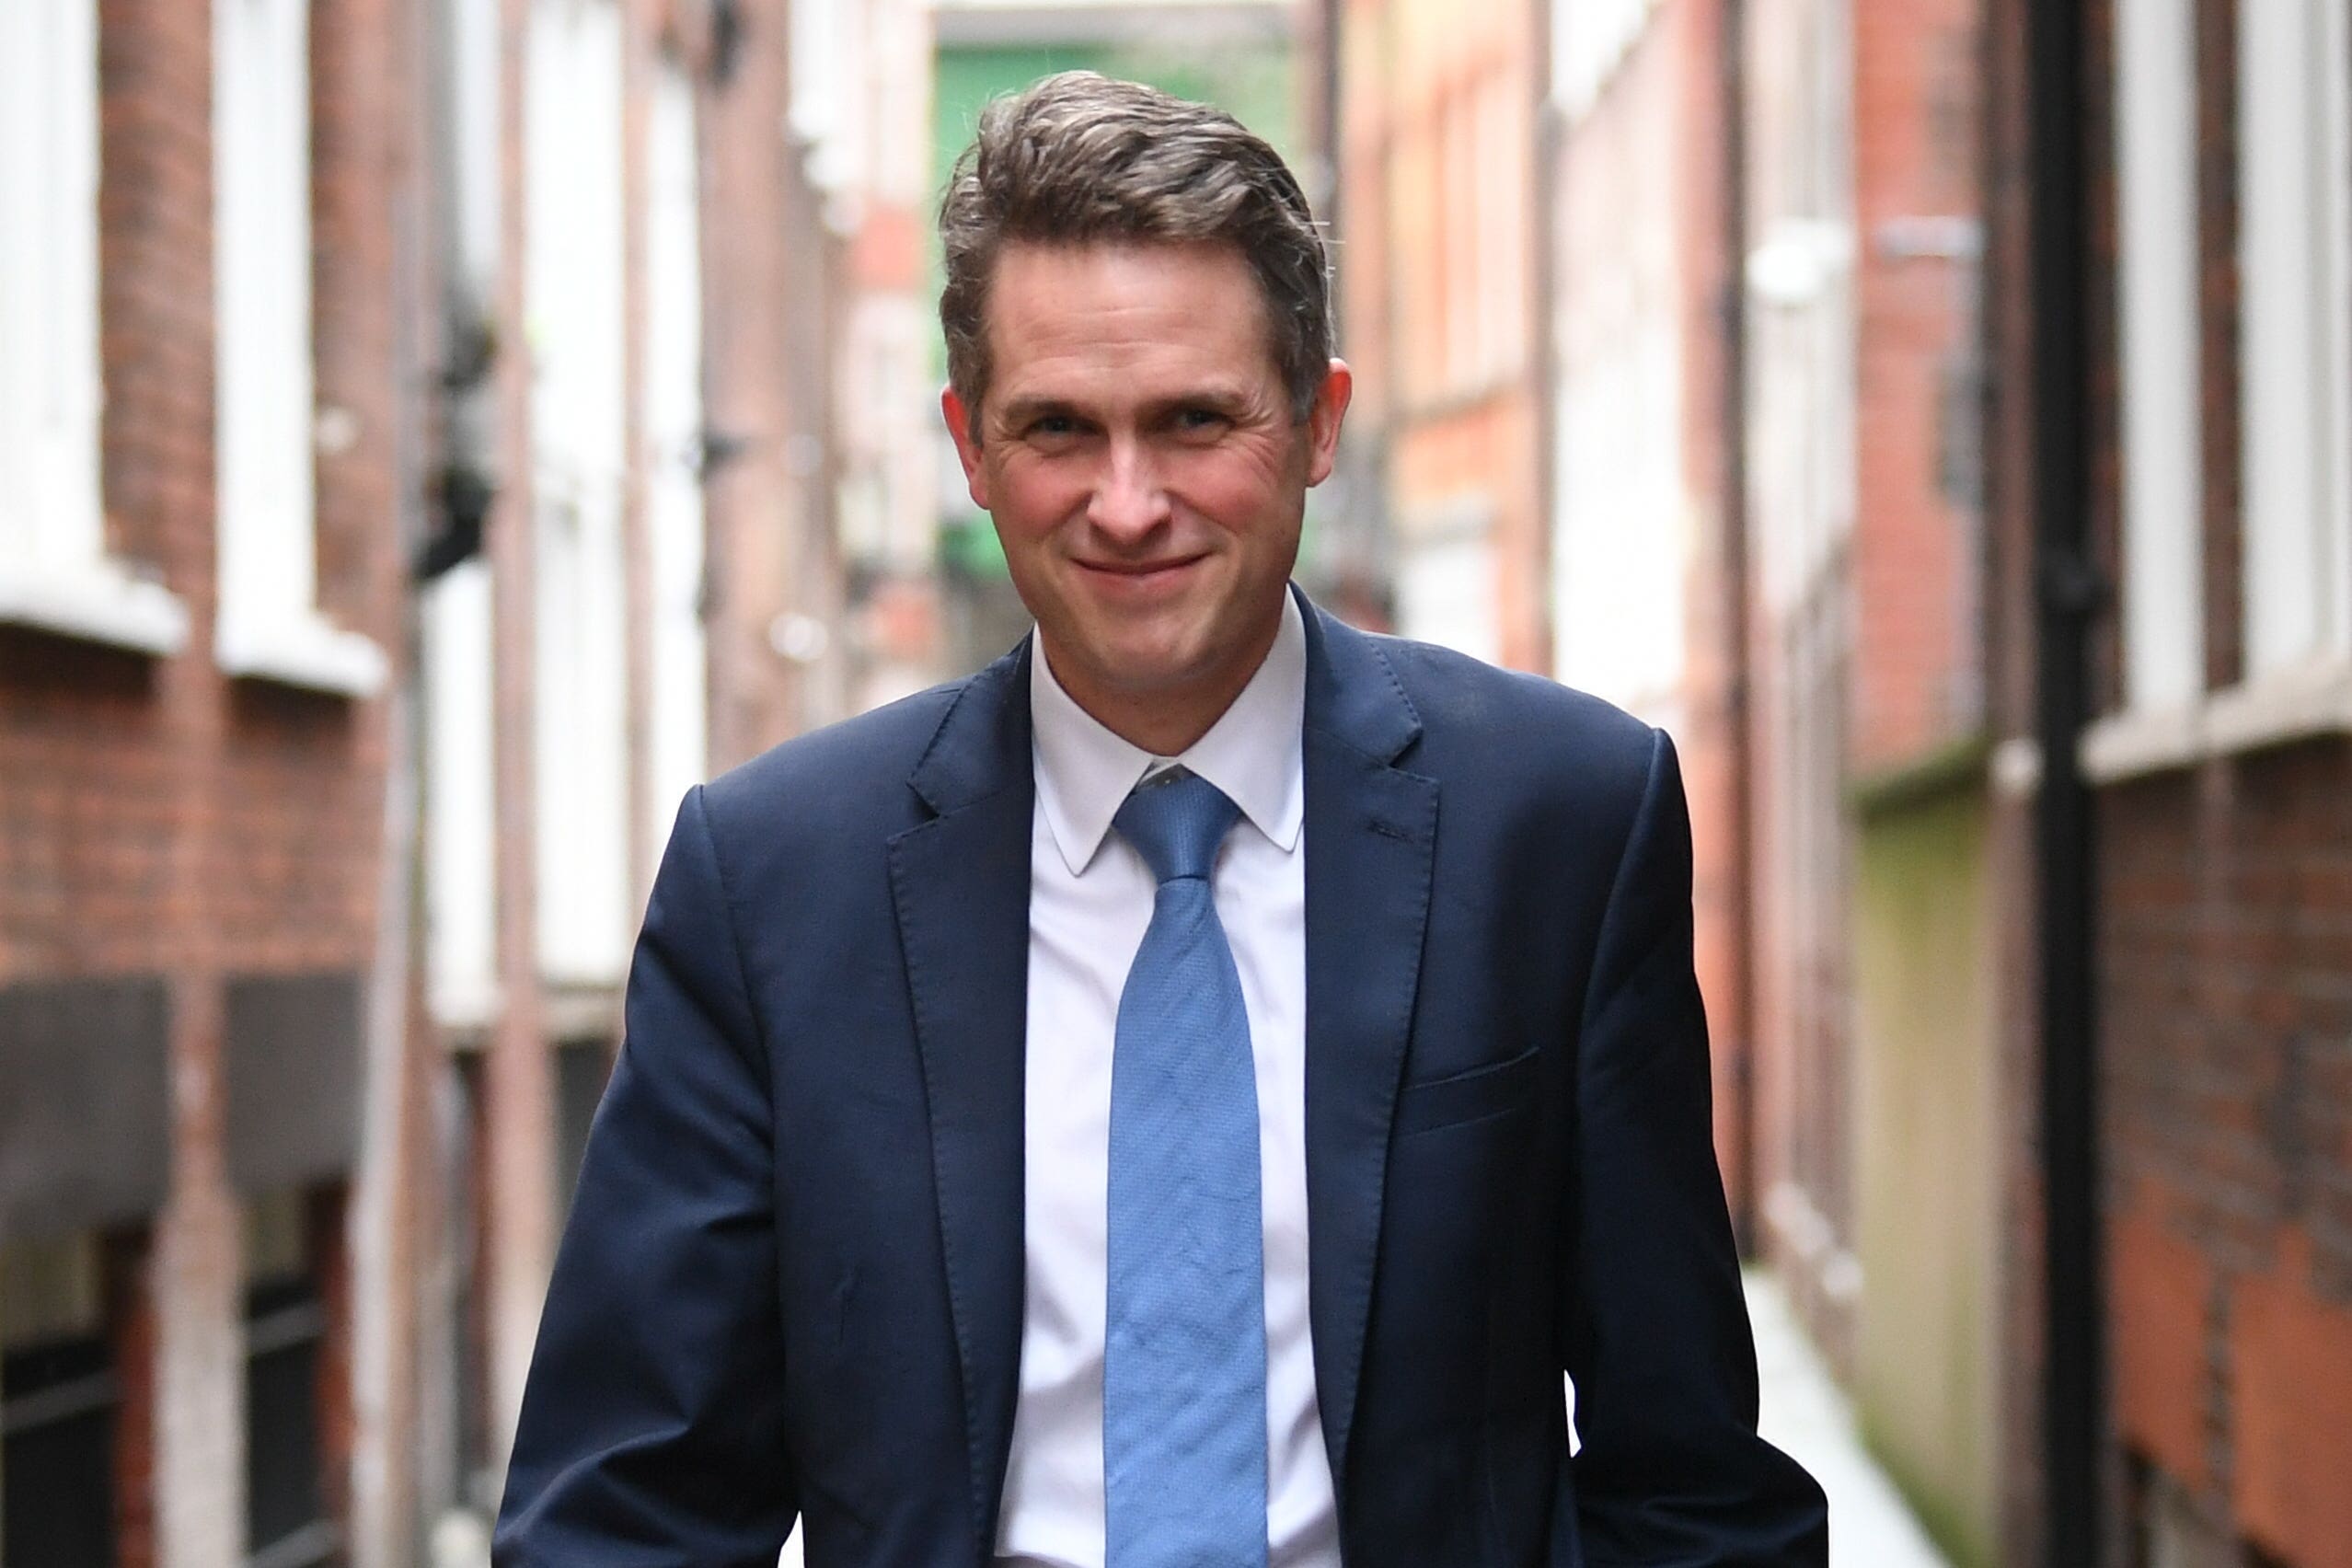 Sir Gavin Williamson told the court he felt intimidated during the encounters